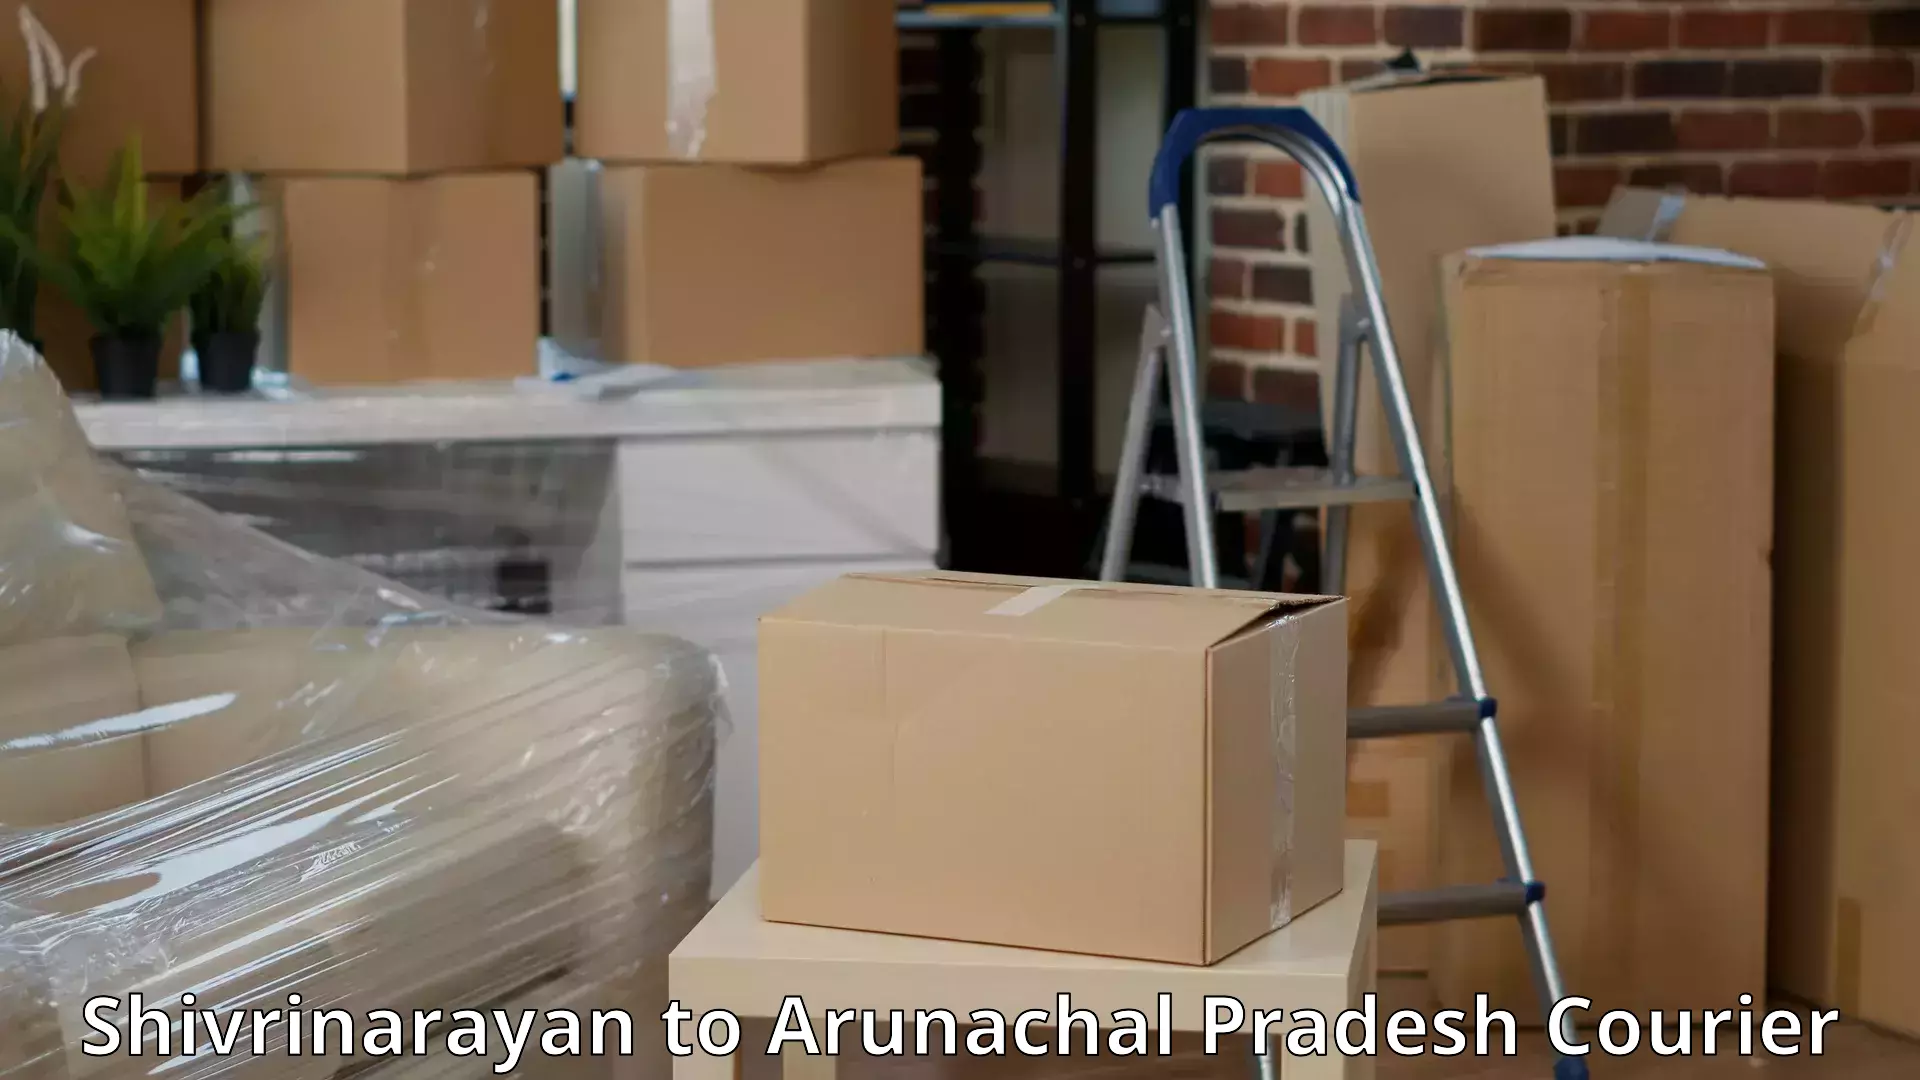 Expert moving and storage Shivrinarayan to Aalo